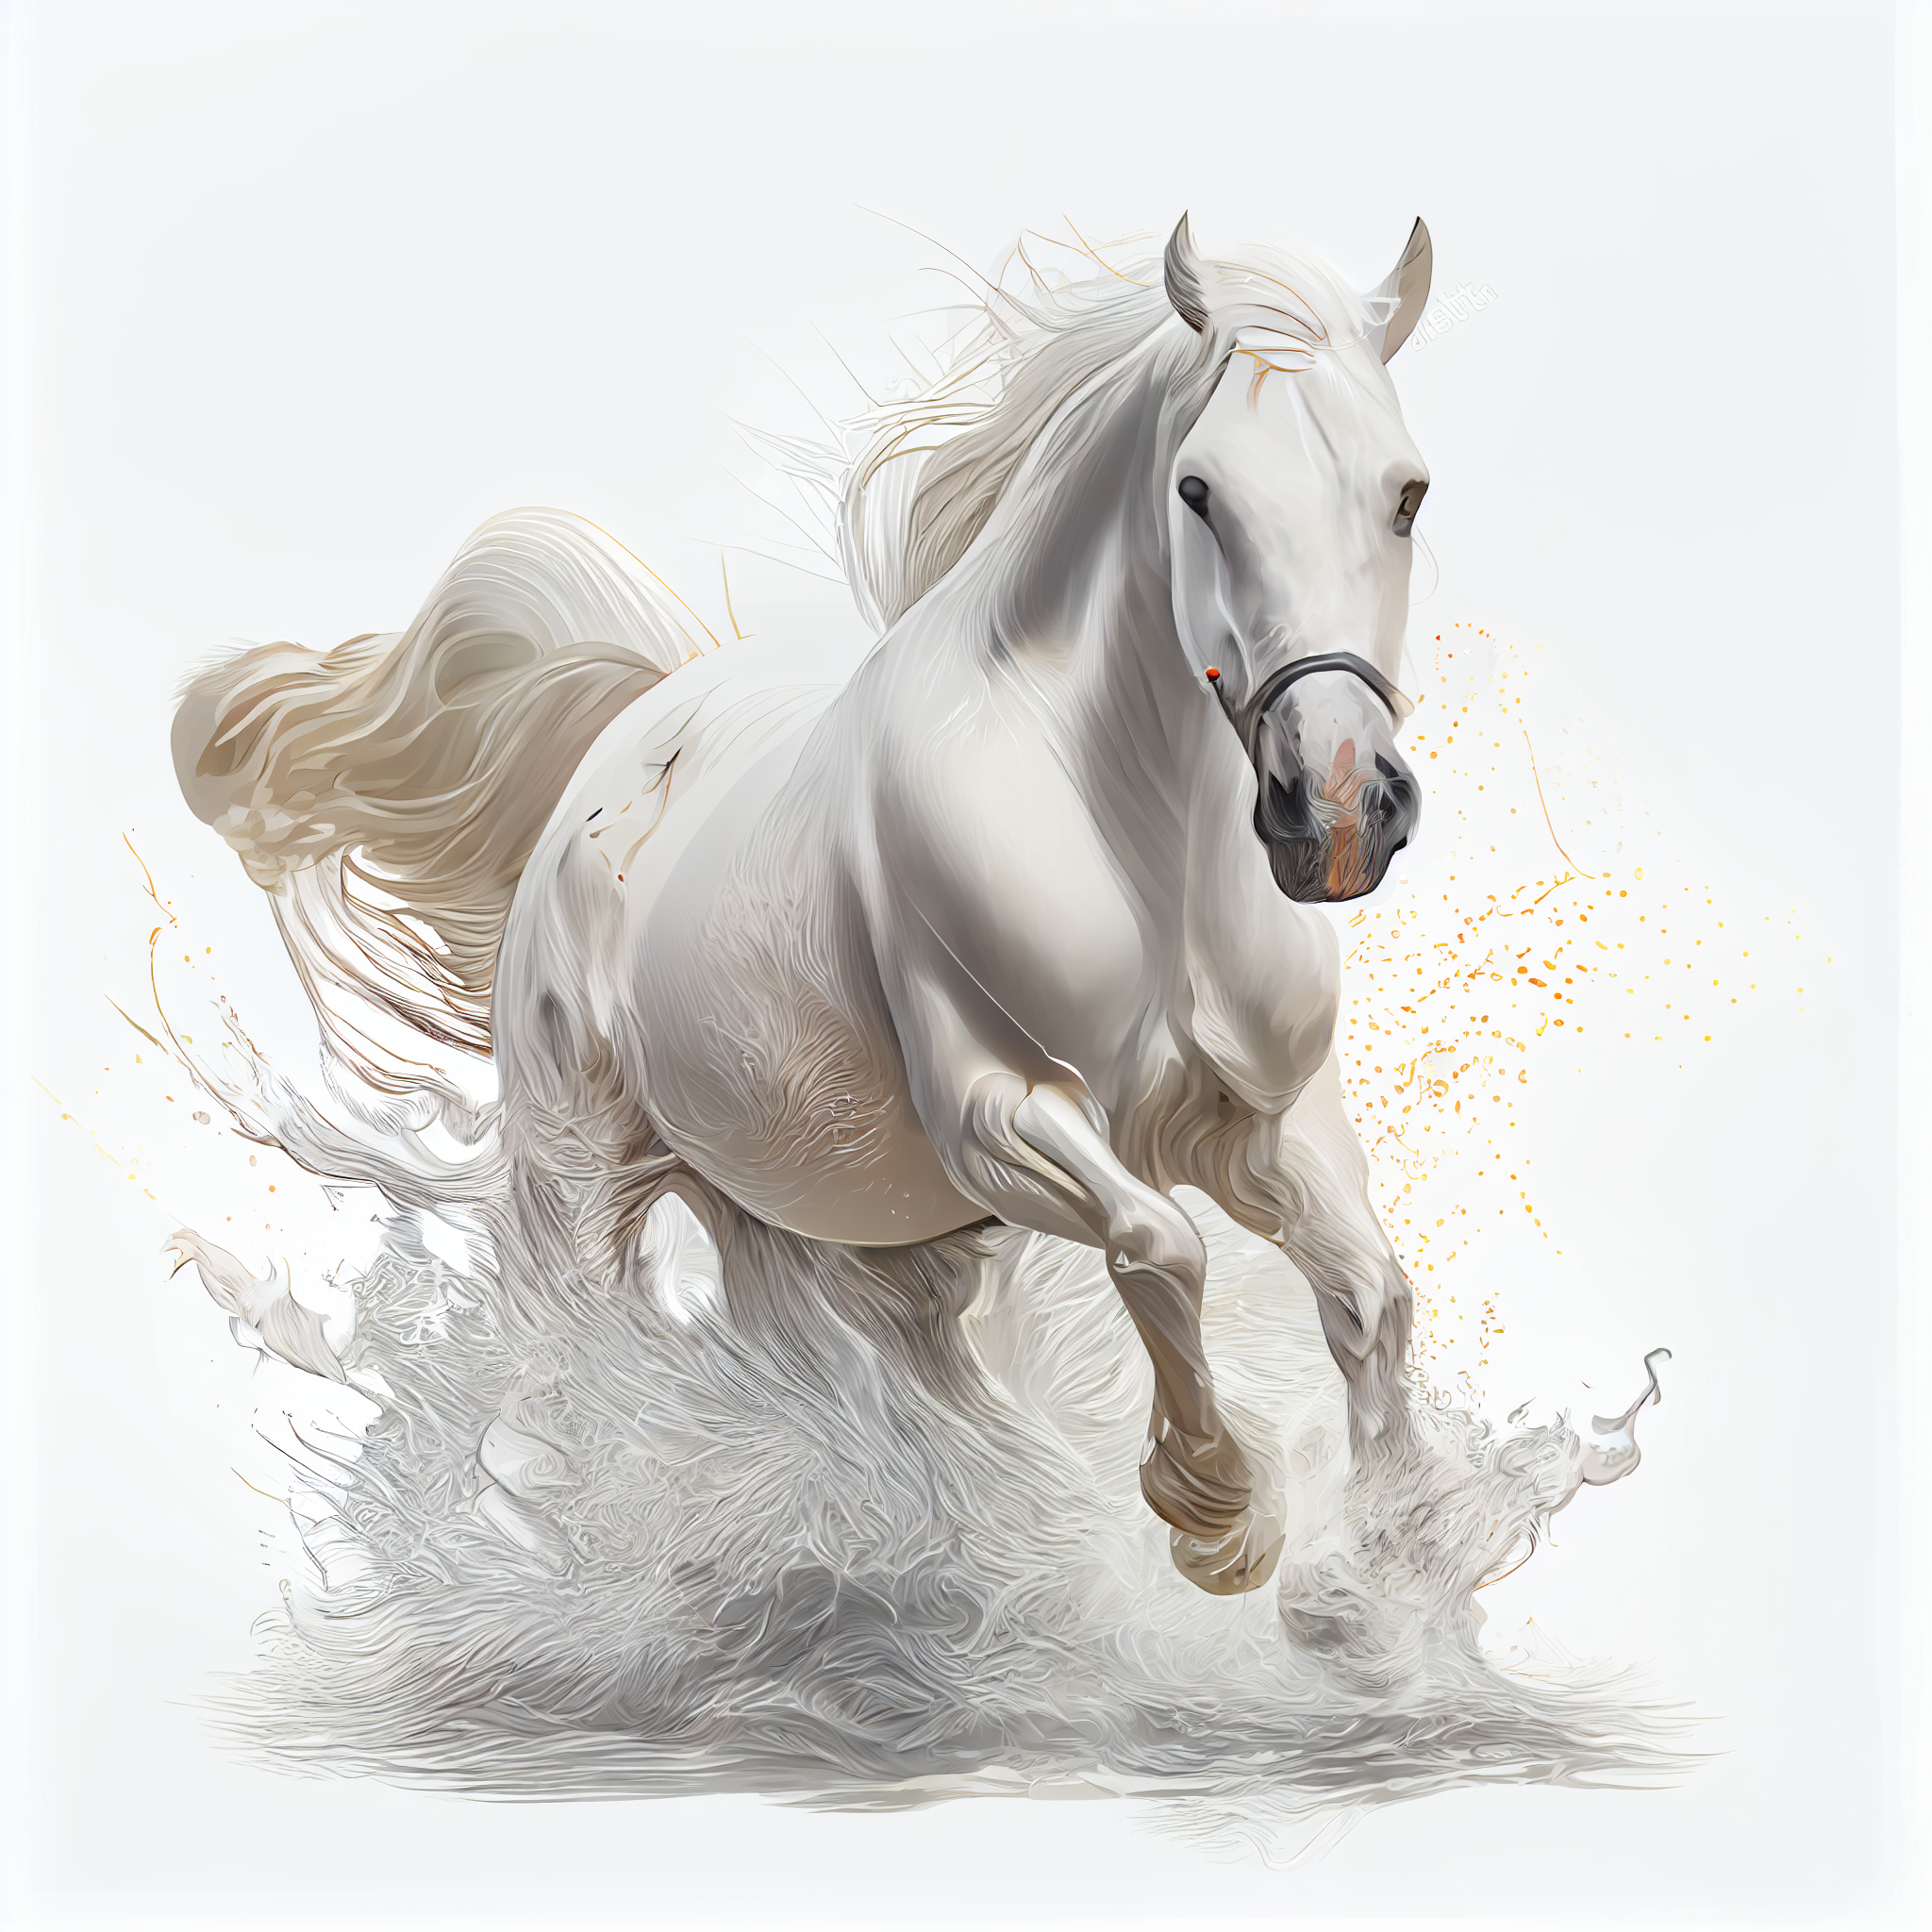 Power and Grace: A Stunning Spray Art Print of a Majestic White Horse in Motion